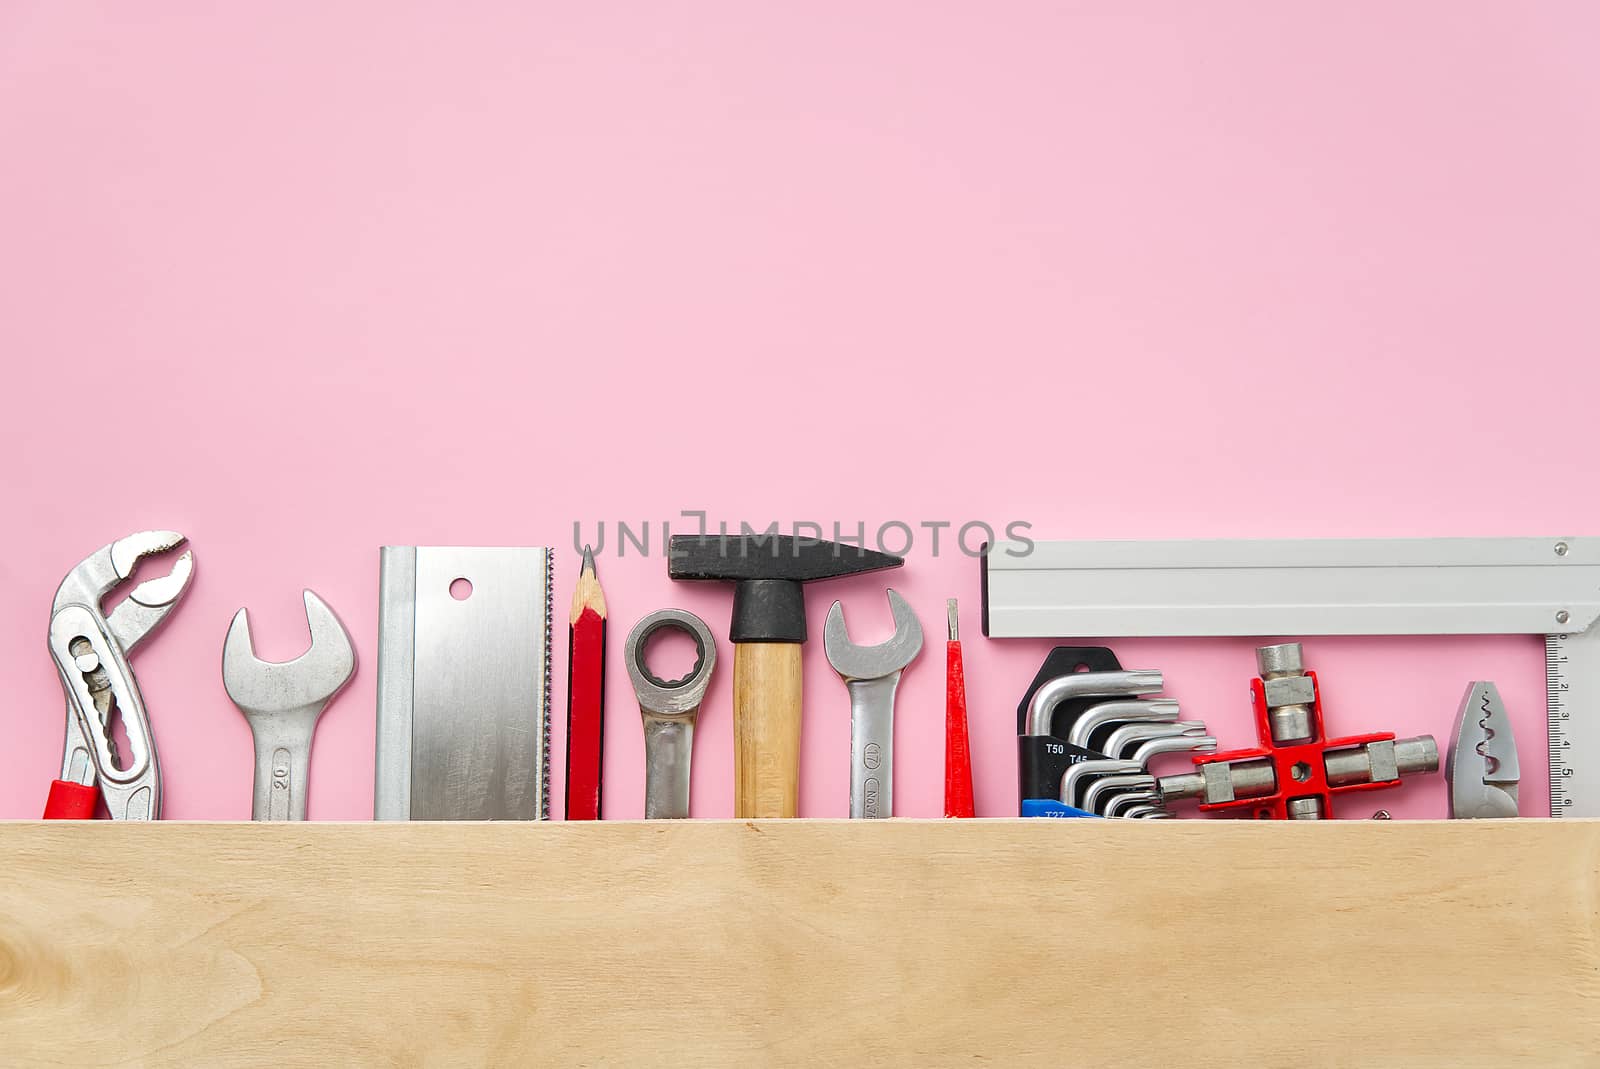 Home maintenance, service, diy concept. Tools for wood, metal and other construction work. Top view on DIY tools. home repairs. on pink background. by PhotoTime